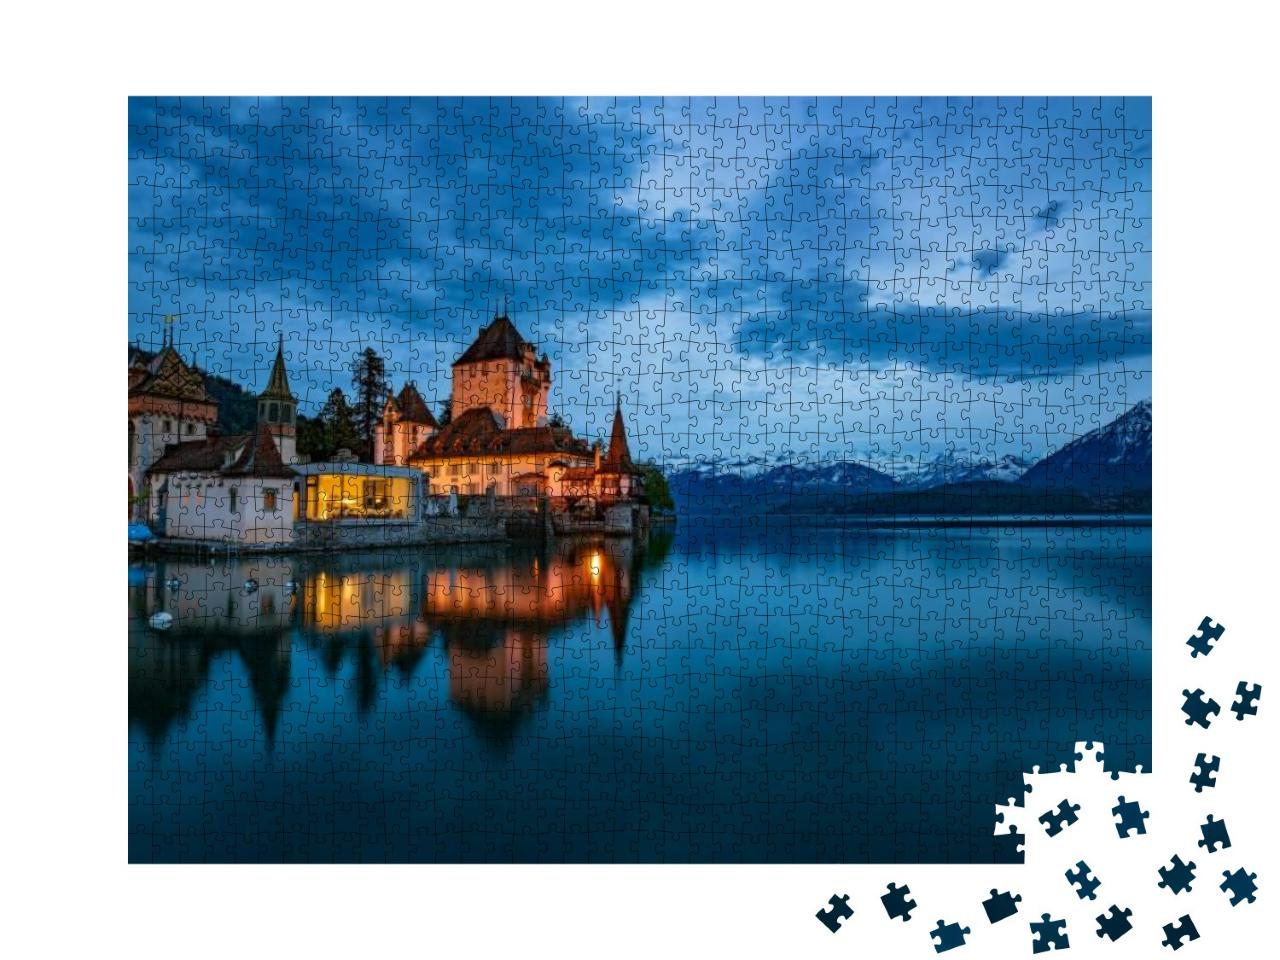 Nightscape of Amazing Oberhofen Castle Reflected in Water... Jigsaw Puzzle with 1000 pieces